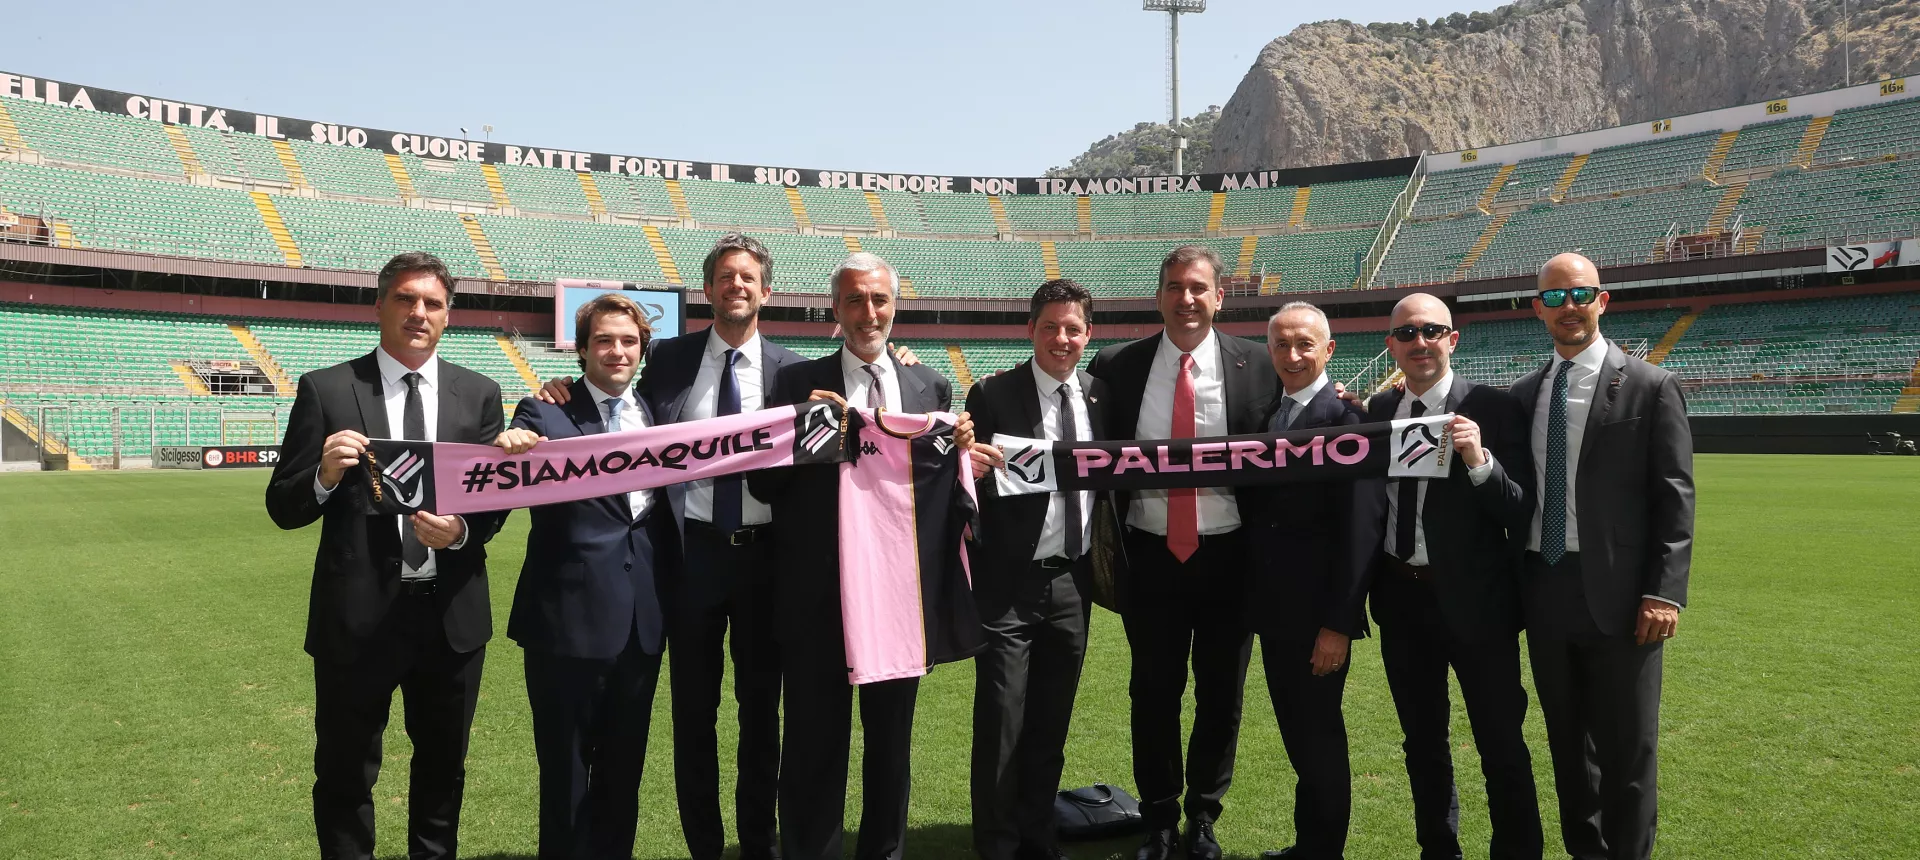 City Football Group acquire majority stake of Palermo FC for reported €13 million fee